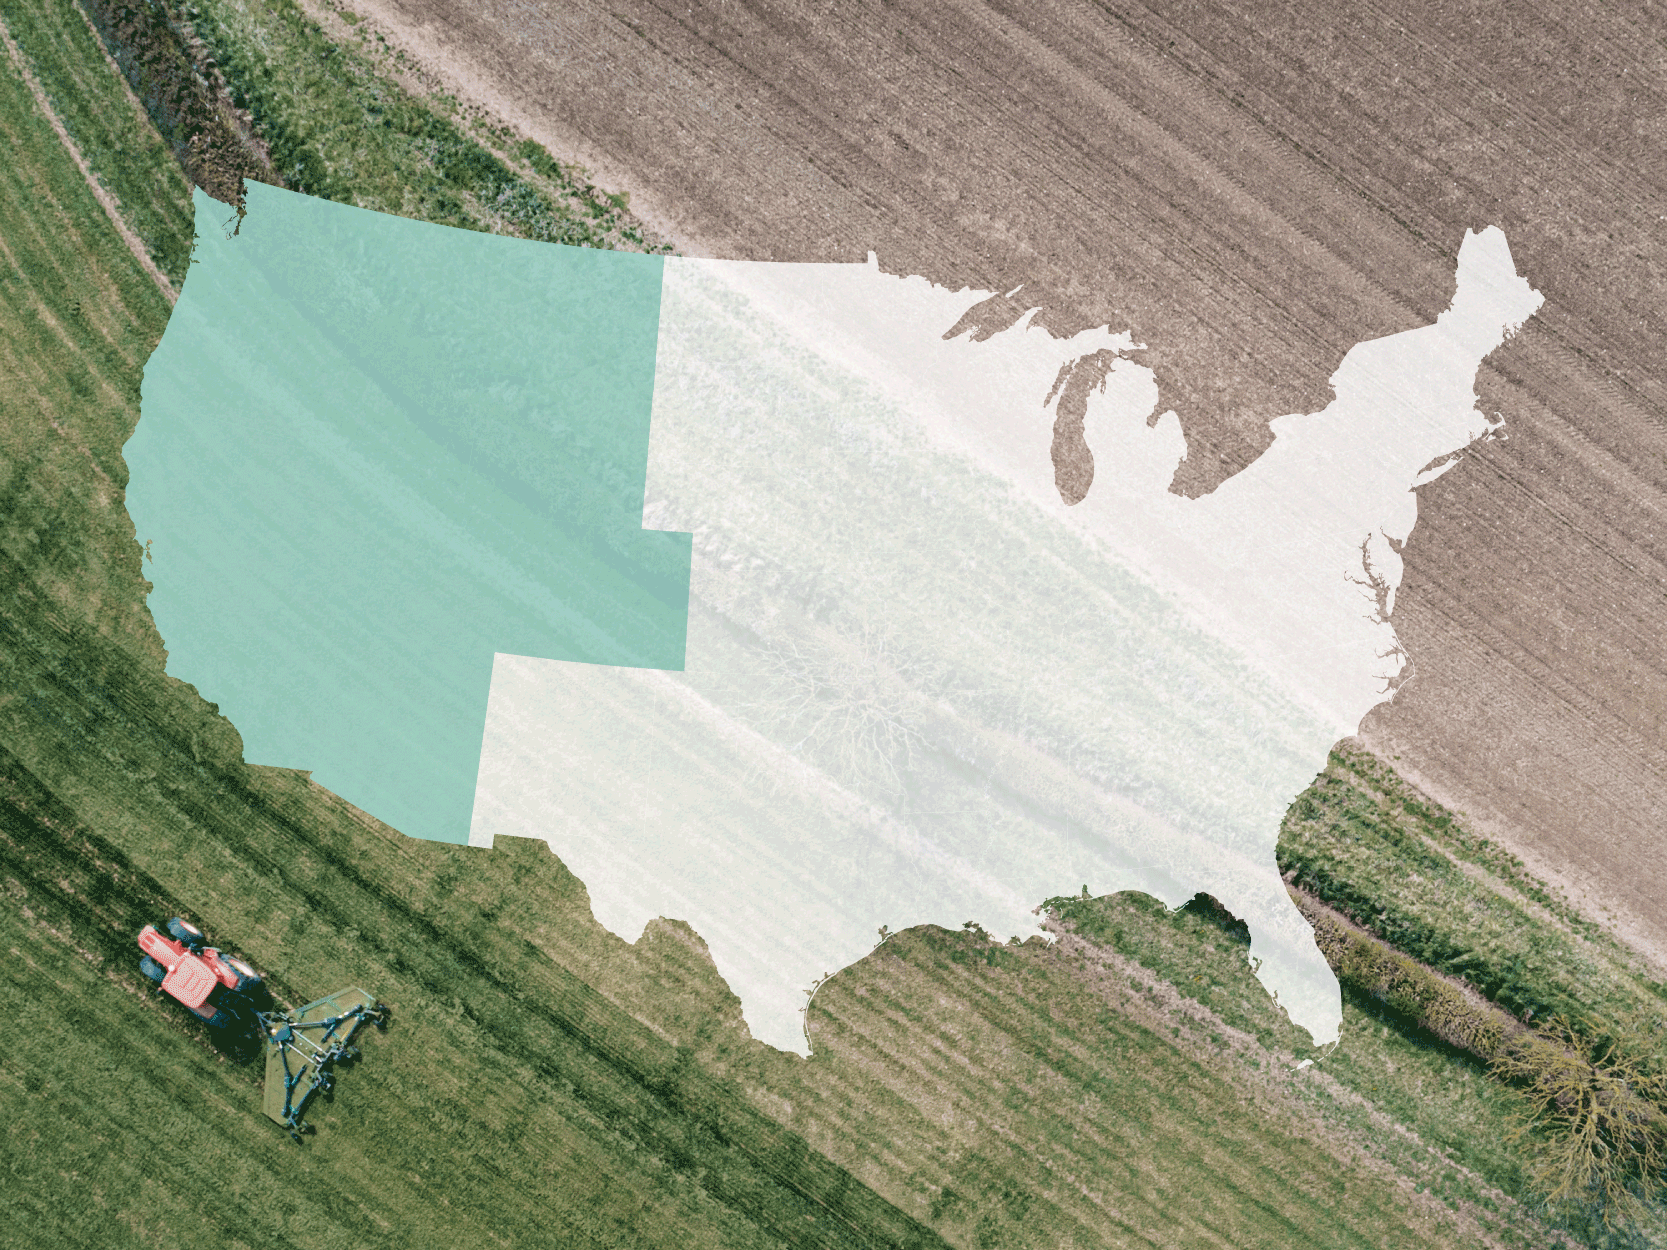 Thumbnail for protected lands story showing map of U.S. over cropland.